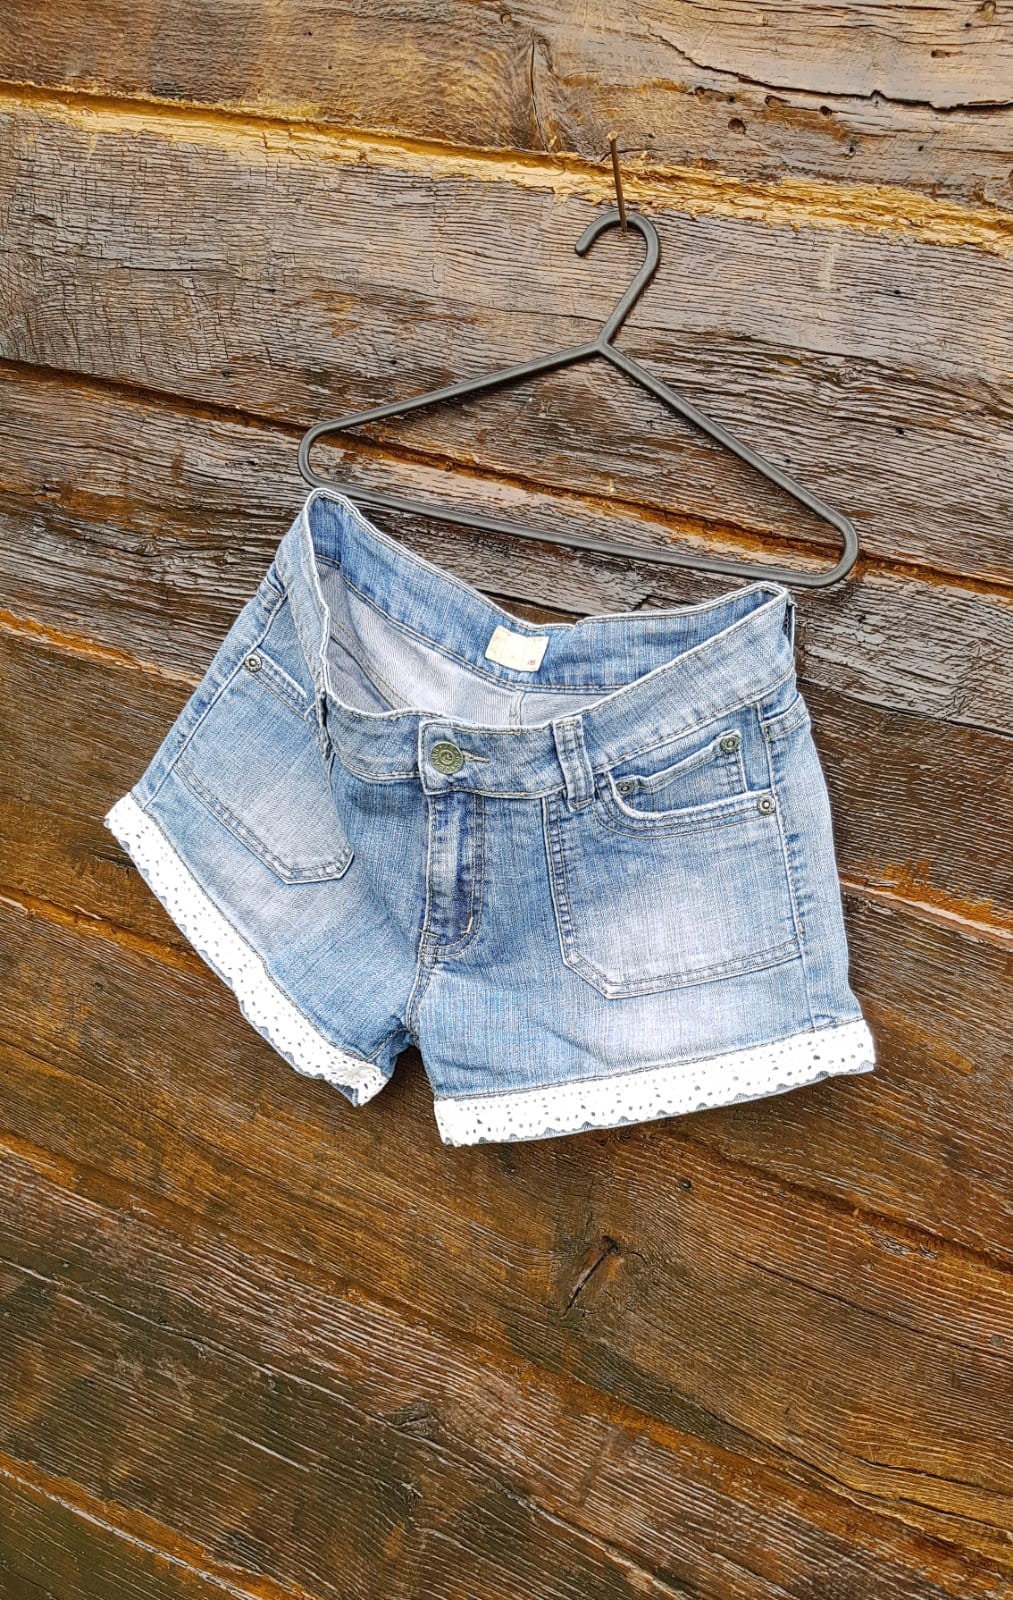 Handmade Upcycle XXL Jeans Shorts With Lace ENV0046 - Etsy